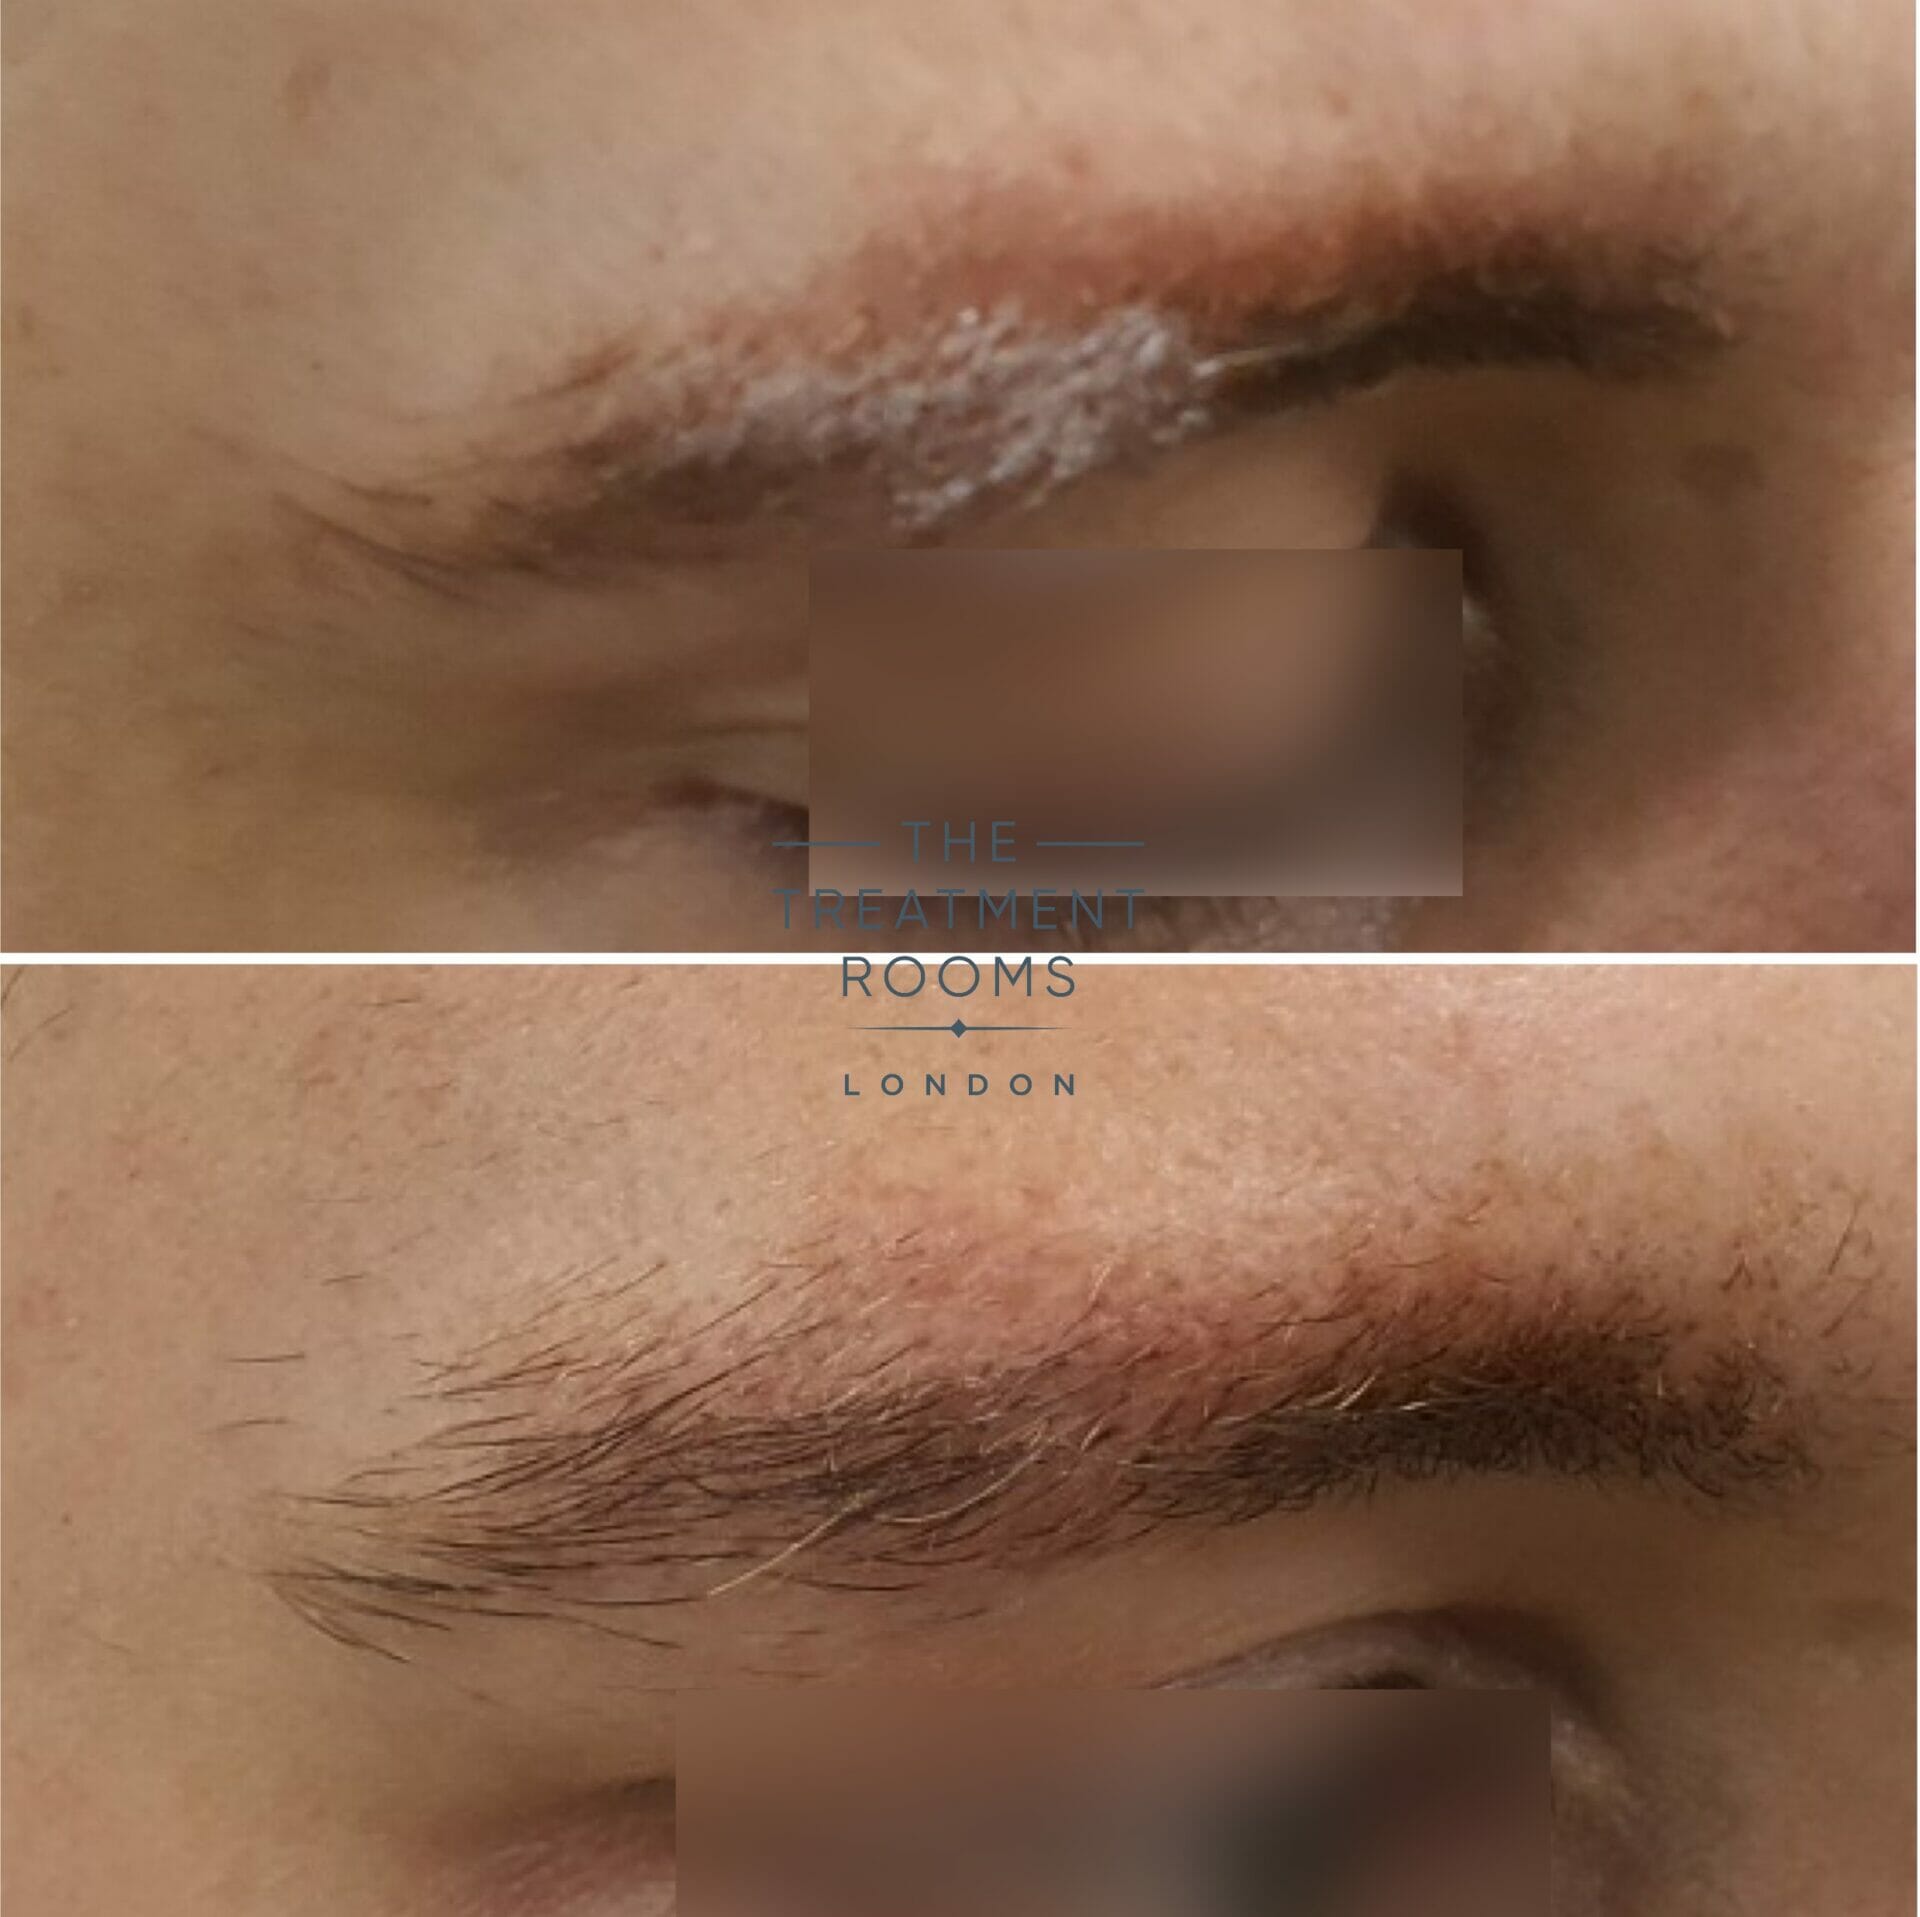 how much does an eyebrow hair transplant cost